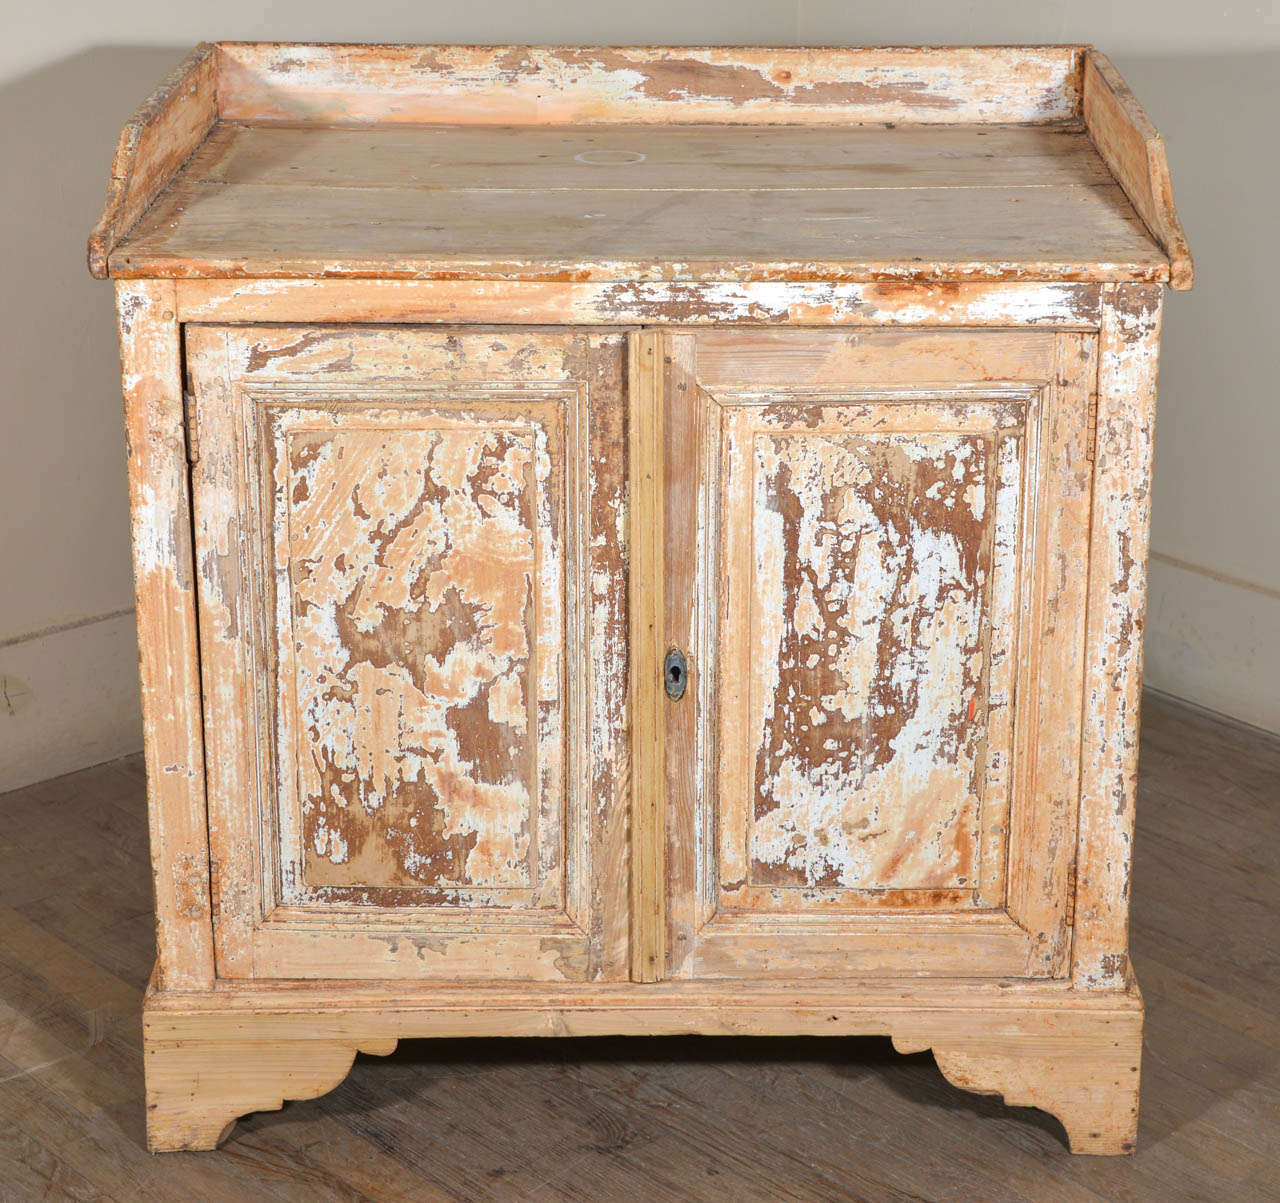 19th century French two door buffet in pine, with remnants of original paint; perfect as a base for a vanity sink.